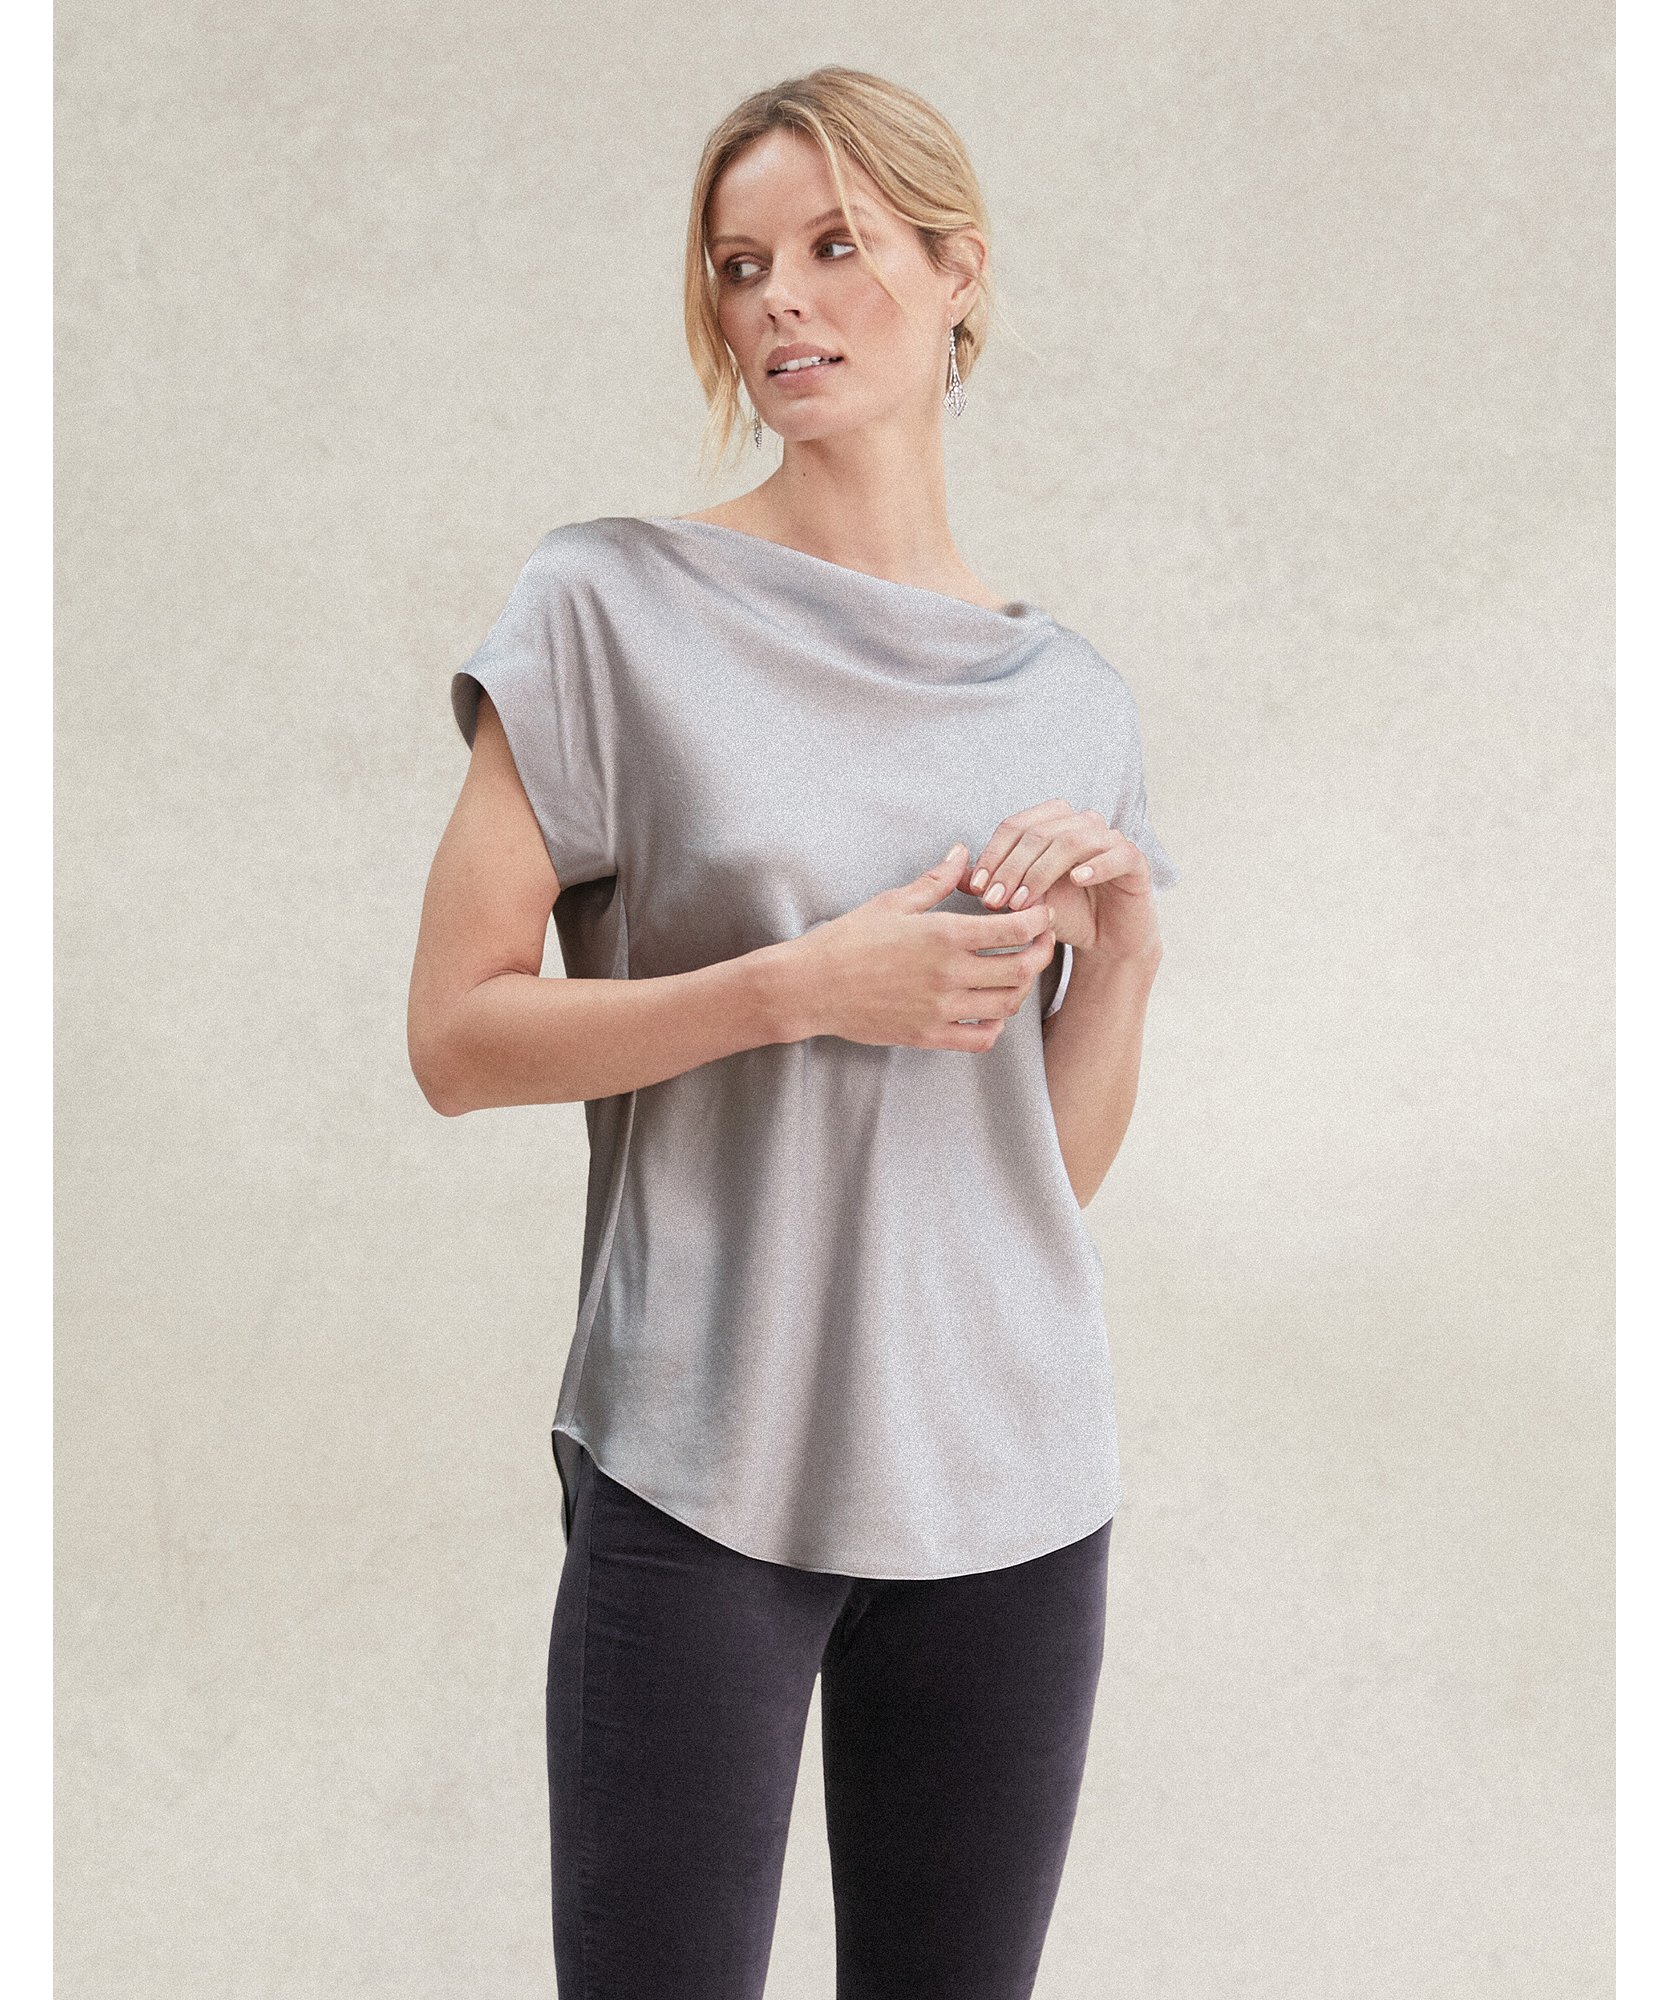 Satin Cowl Neck Top | All Clothing Sale | The White Company US